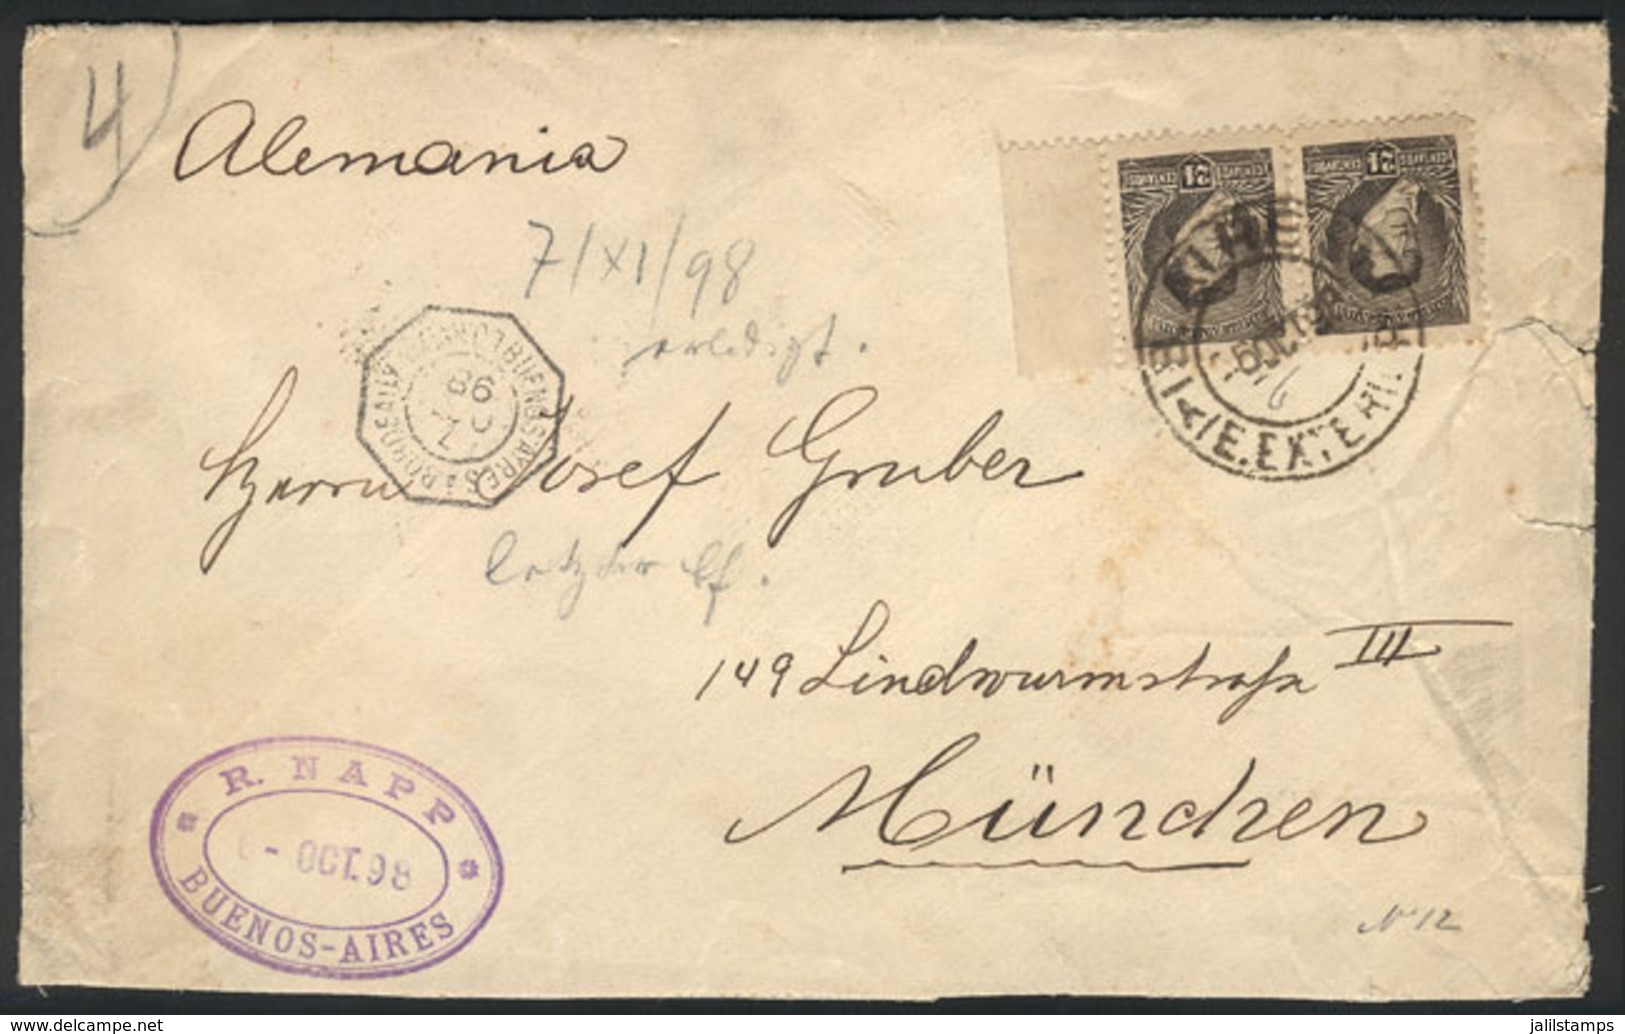 ARGENTINA: Cover Sent From Buenos Aires To Germany On 5/OC/1898 Franked With 48c. (pair GJ.182), VF! - Briefe U. Dokumente